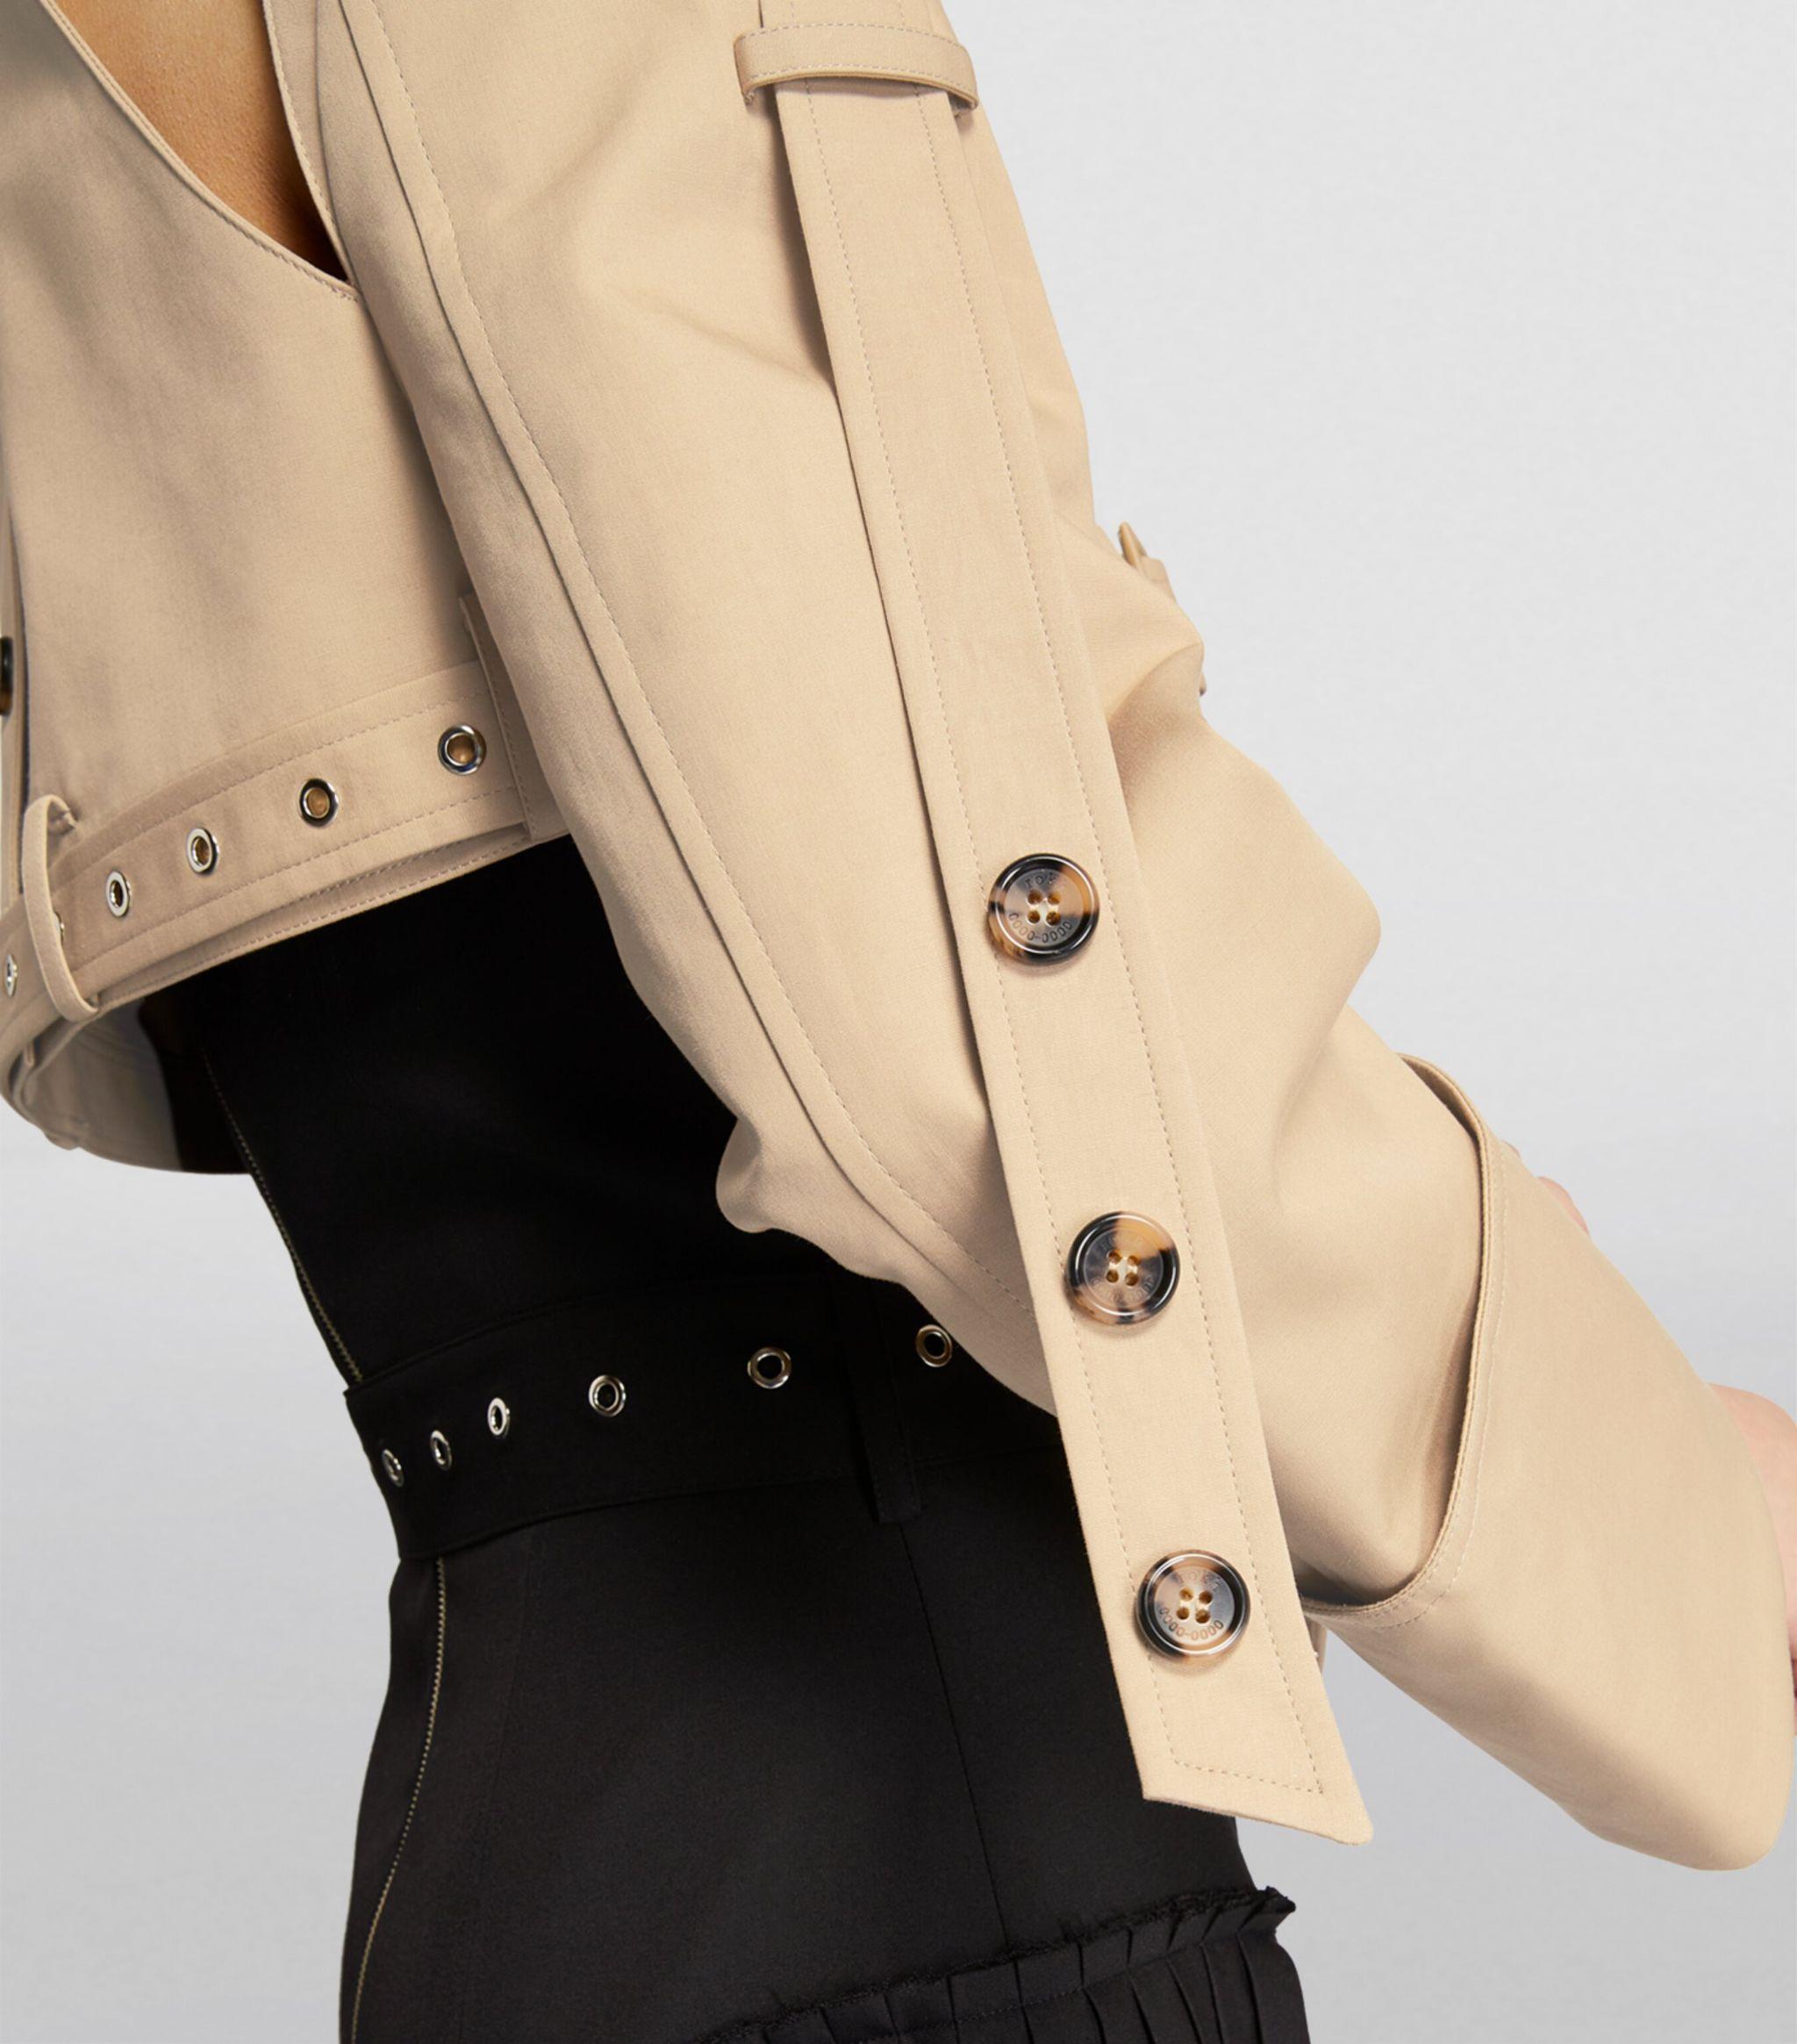 ROKH Cropped Trench Coat in Natural | Lyst